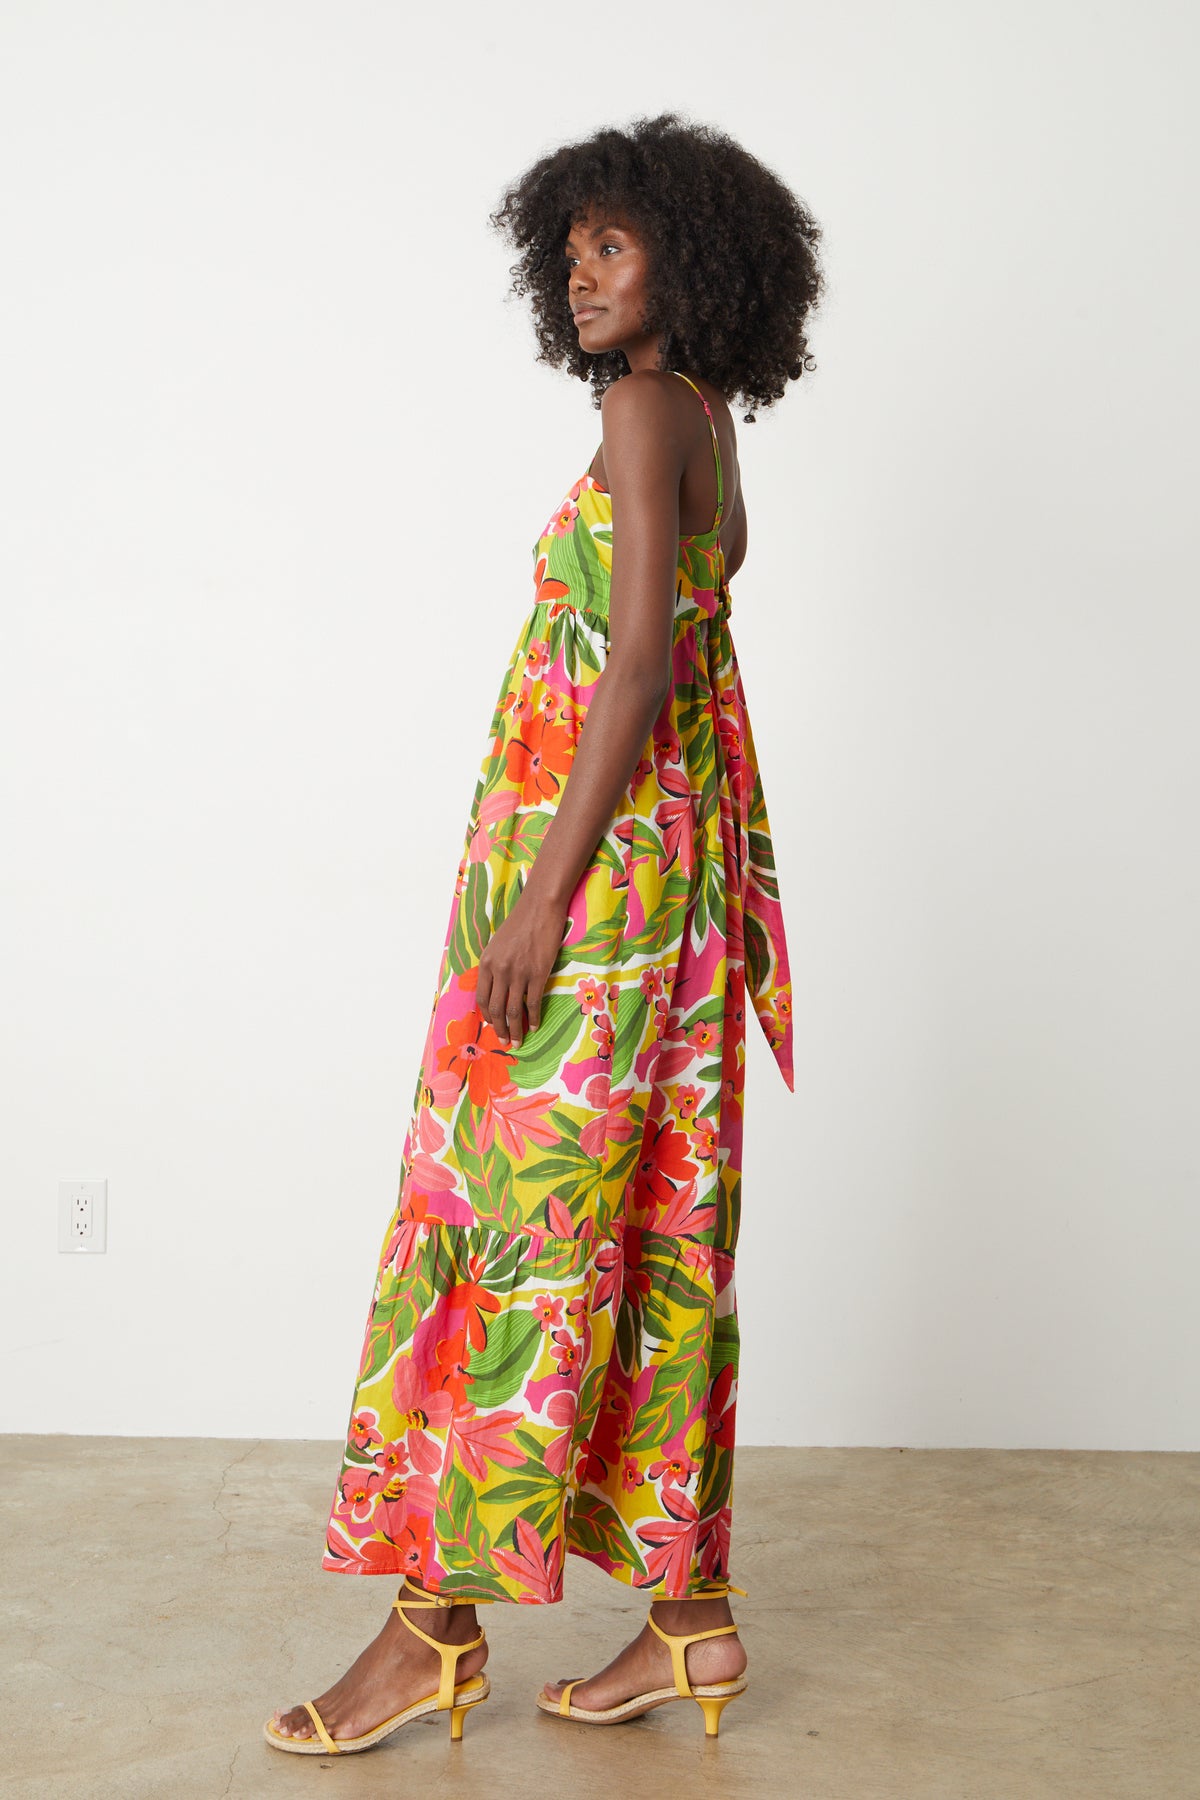   A black woman wearing the Velvet by Graham & Spencer Kayla Printed Maxi Dress. 